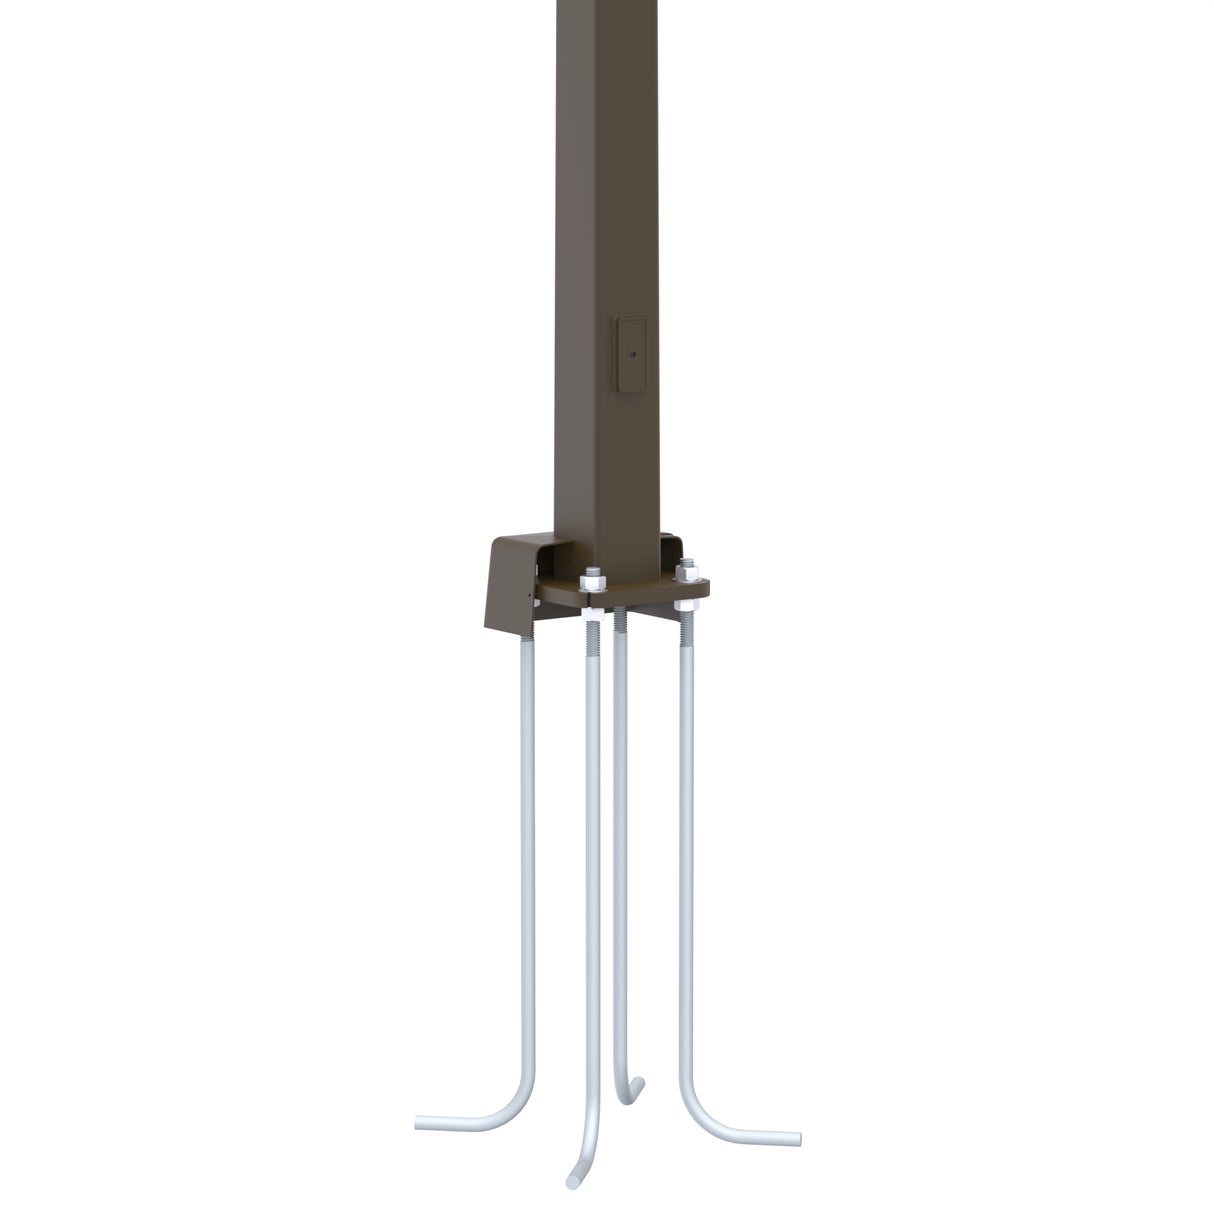 39' Tall x 8.8" Base OD x 4.5" Top OD x 7ga Thick, Square Tapered Steel, Anchor Base Light Pole